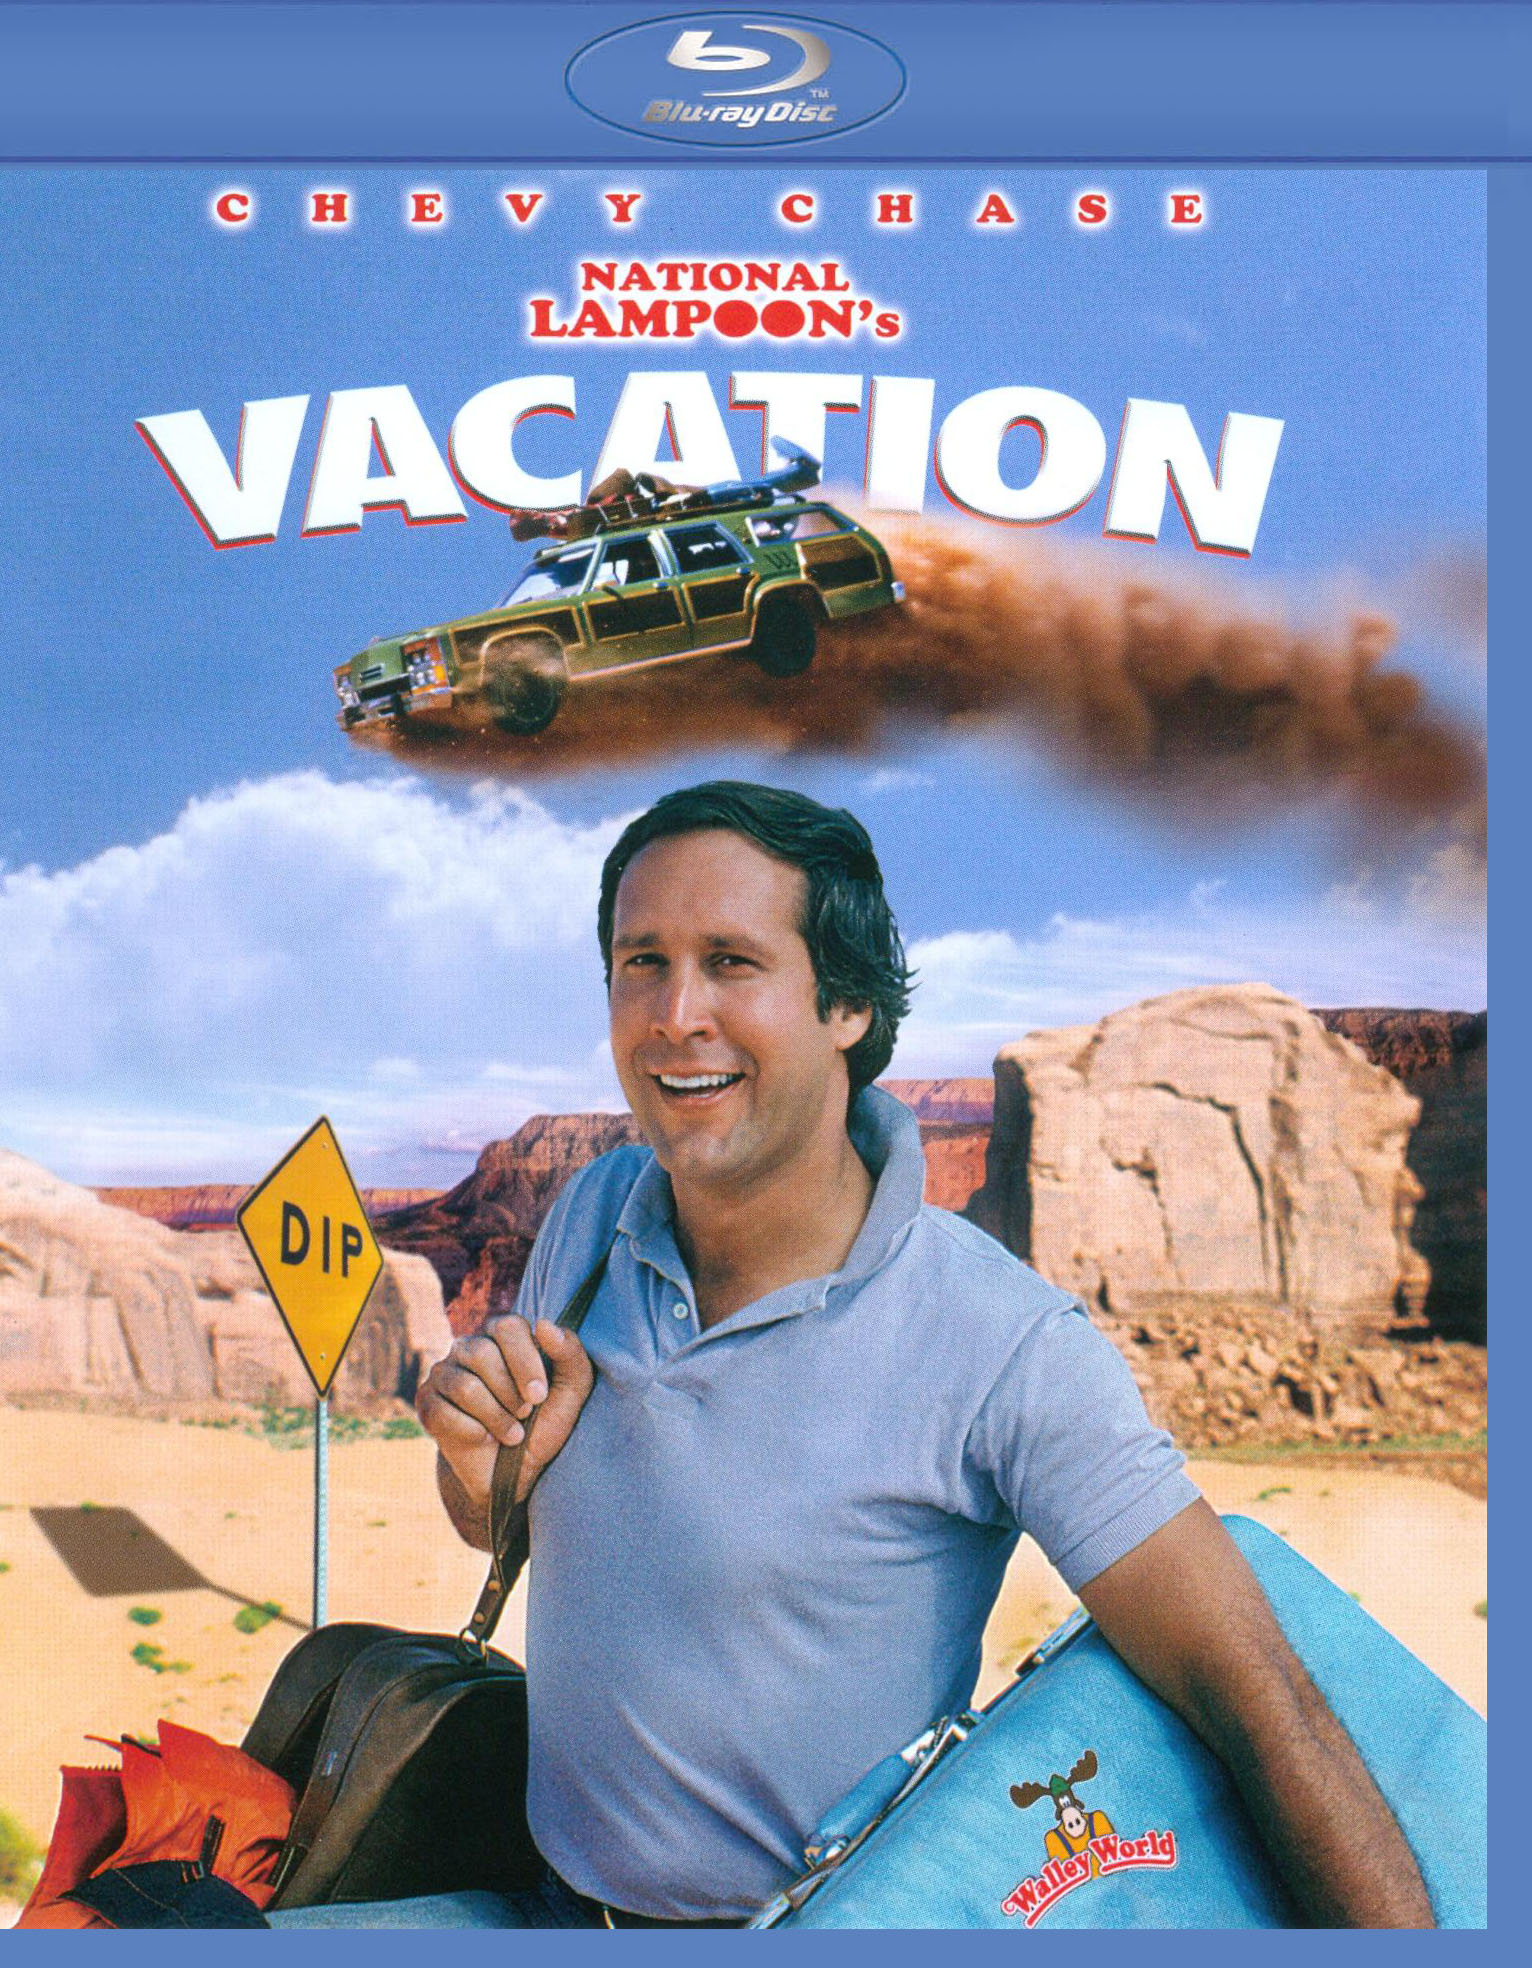 National Lampoon's Vacation [Blu-ray] [1983] - Best Buy